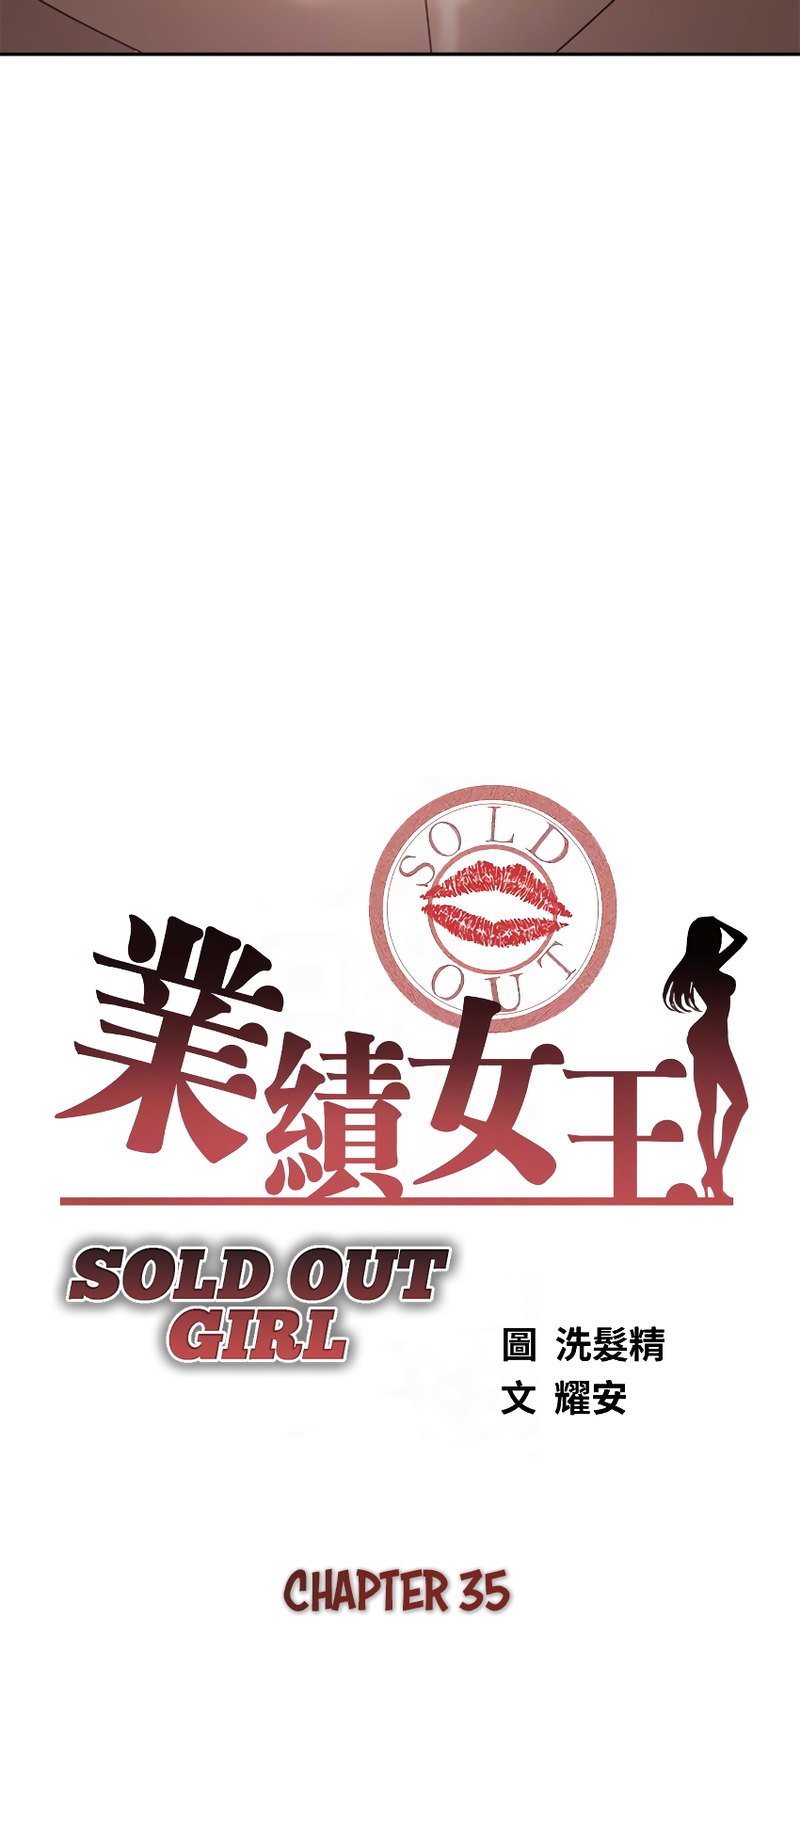 sold-out-girl-chap-35-4